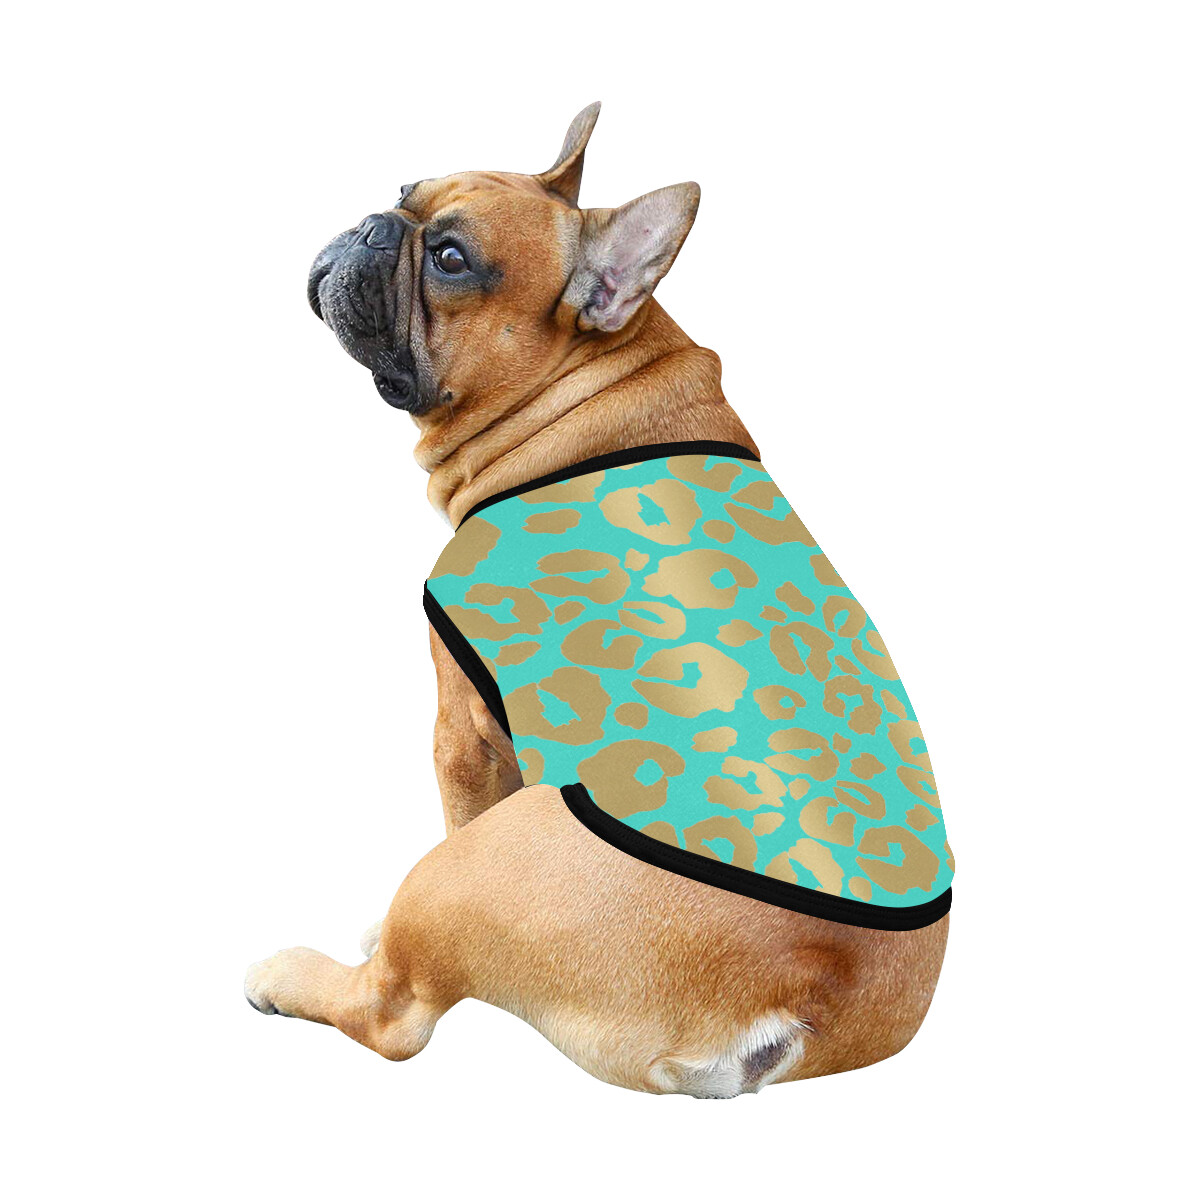 🐕 Leopard print Dog shirt, Dog Tank Top, Dog t-shirt, Dog clothes, Gifts, front back print, 7 sizes XS to 3XL, dog gifts, gold and turquoise